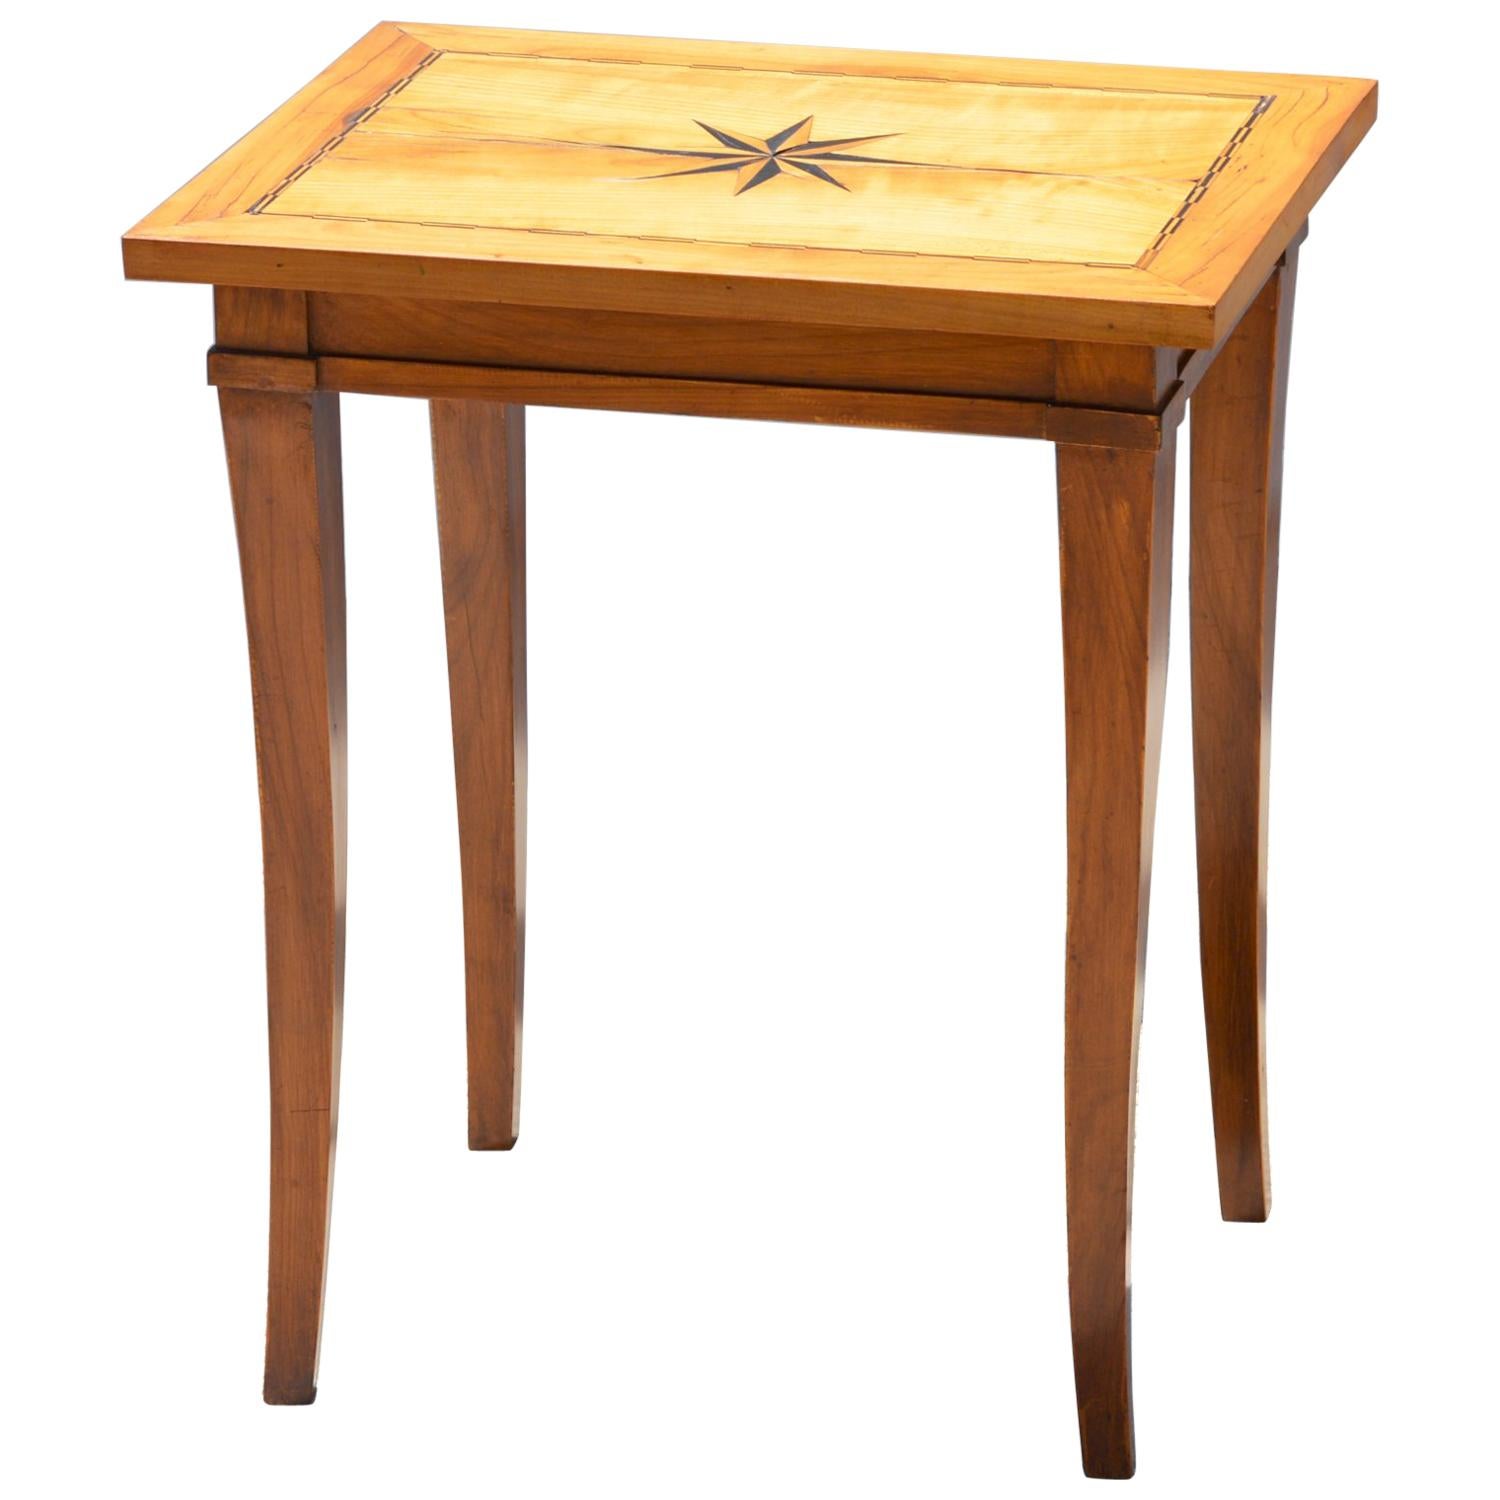 Biedermeier Side Table with North Star Inlay